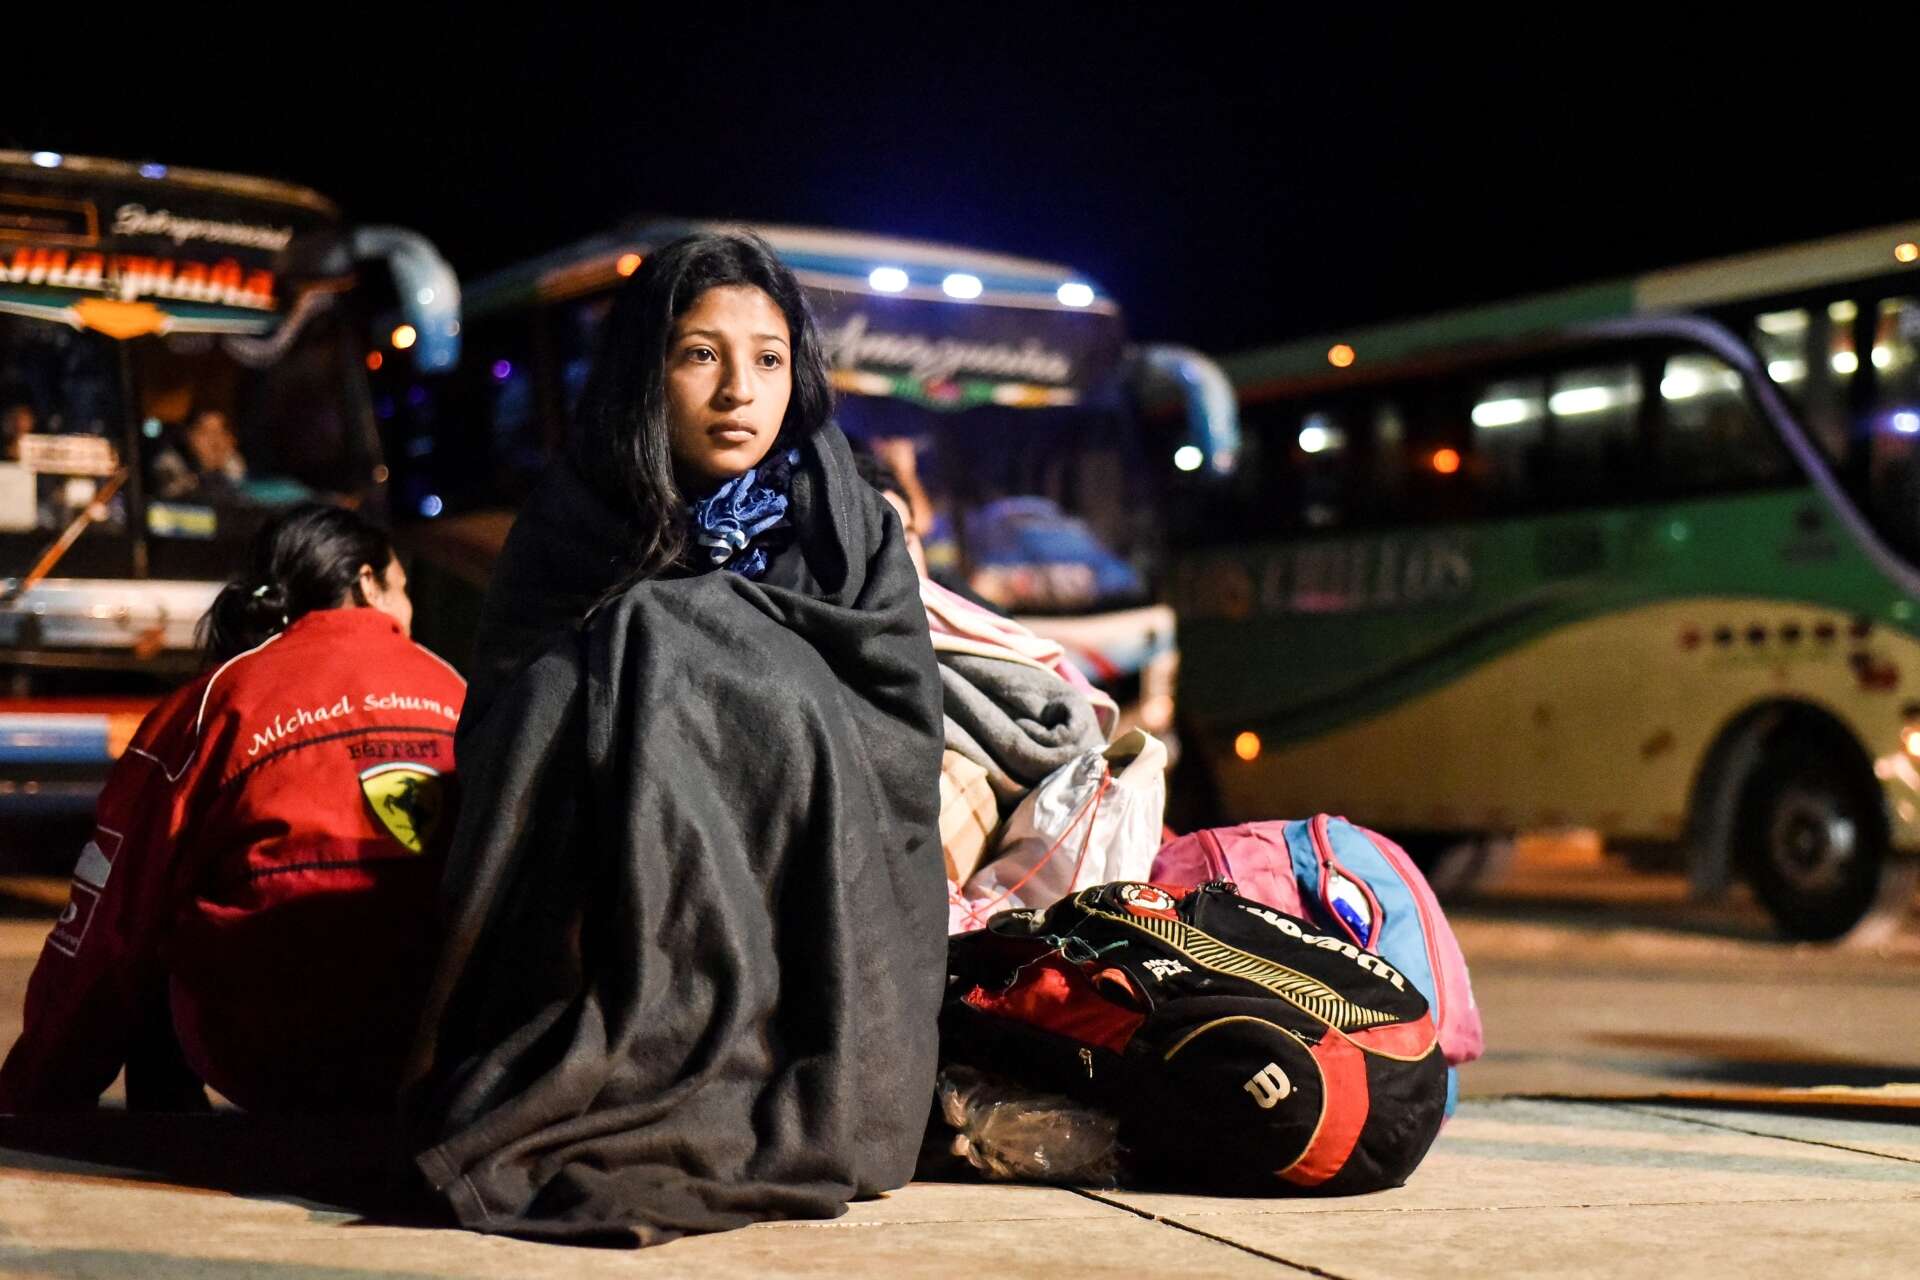 A young woman sits at a bus depot, wrapped in a blanket, next to several bags.